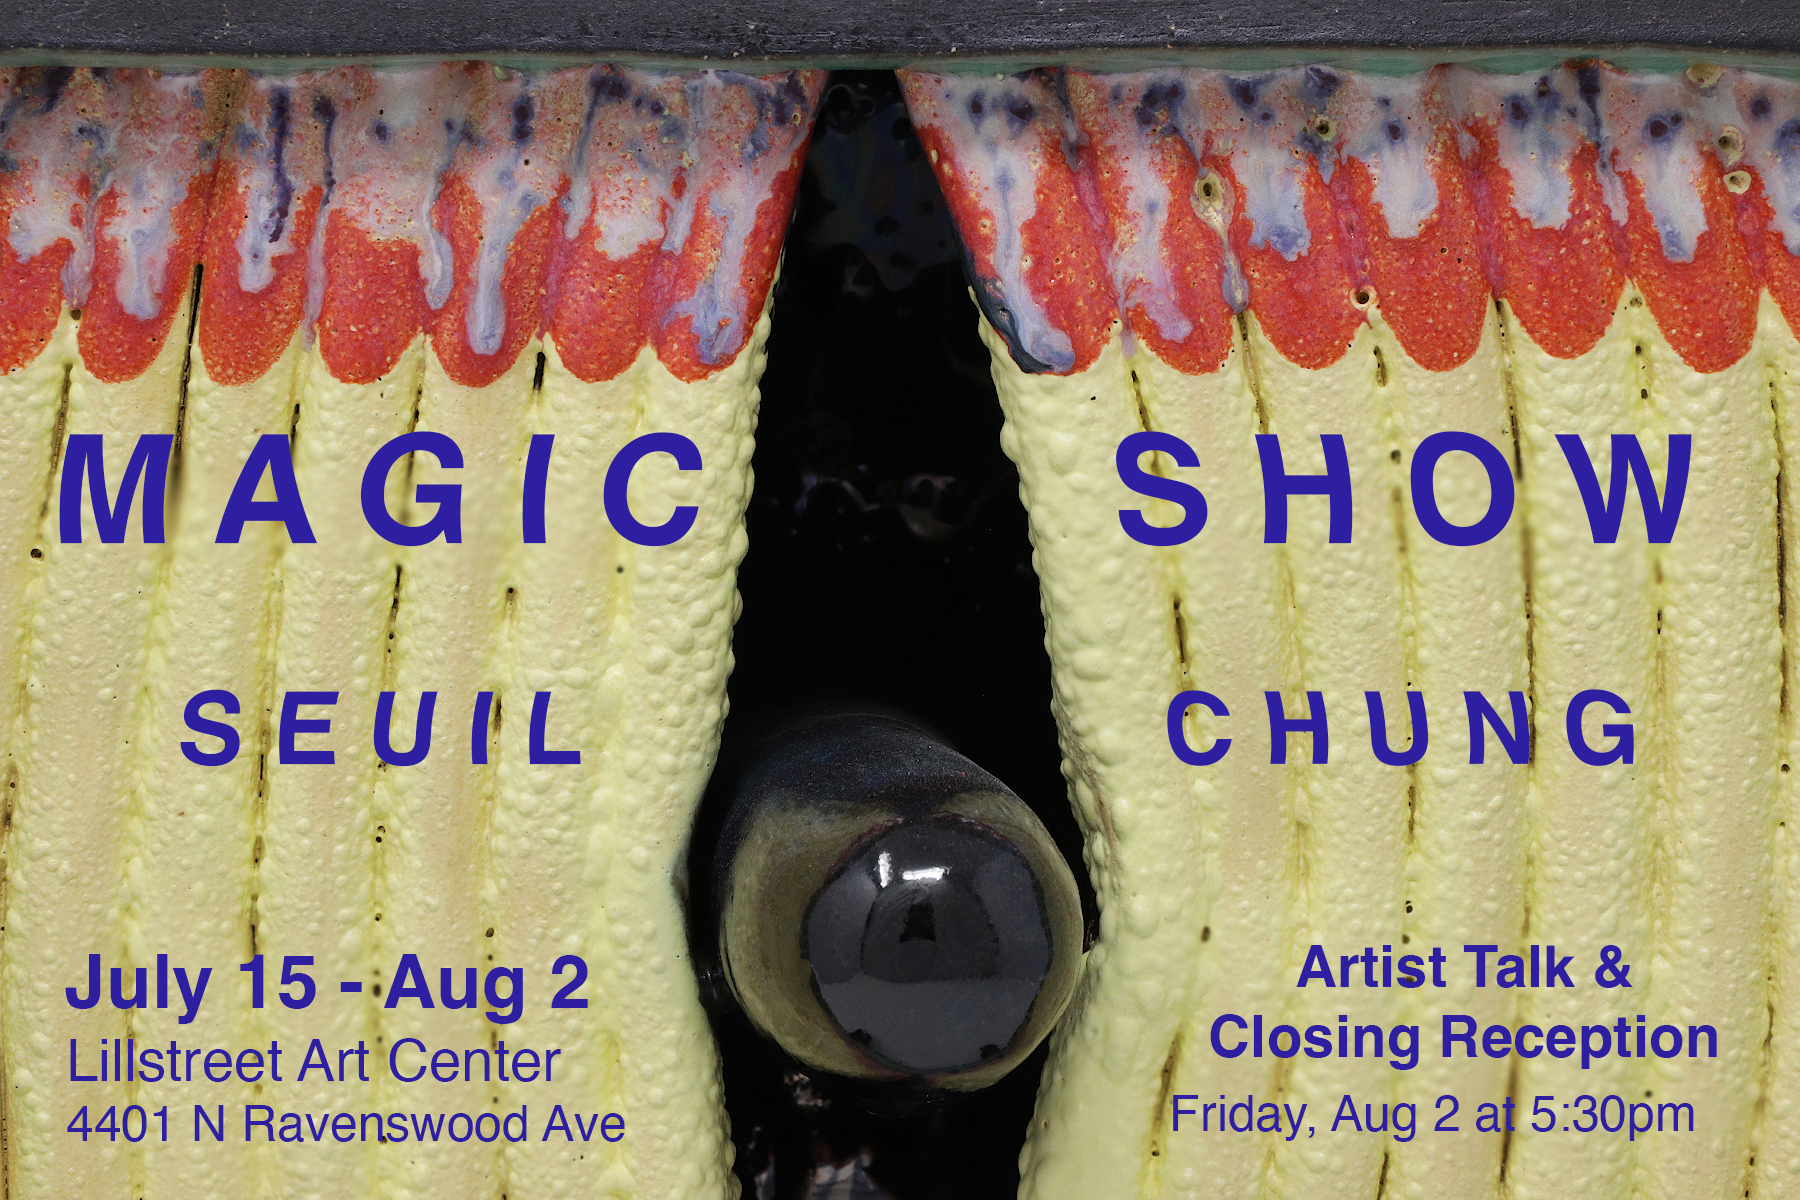 Ceramics Artist-in-Residence, Seuil Chung, presents Magic Show